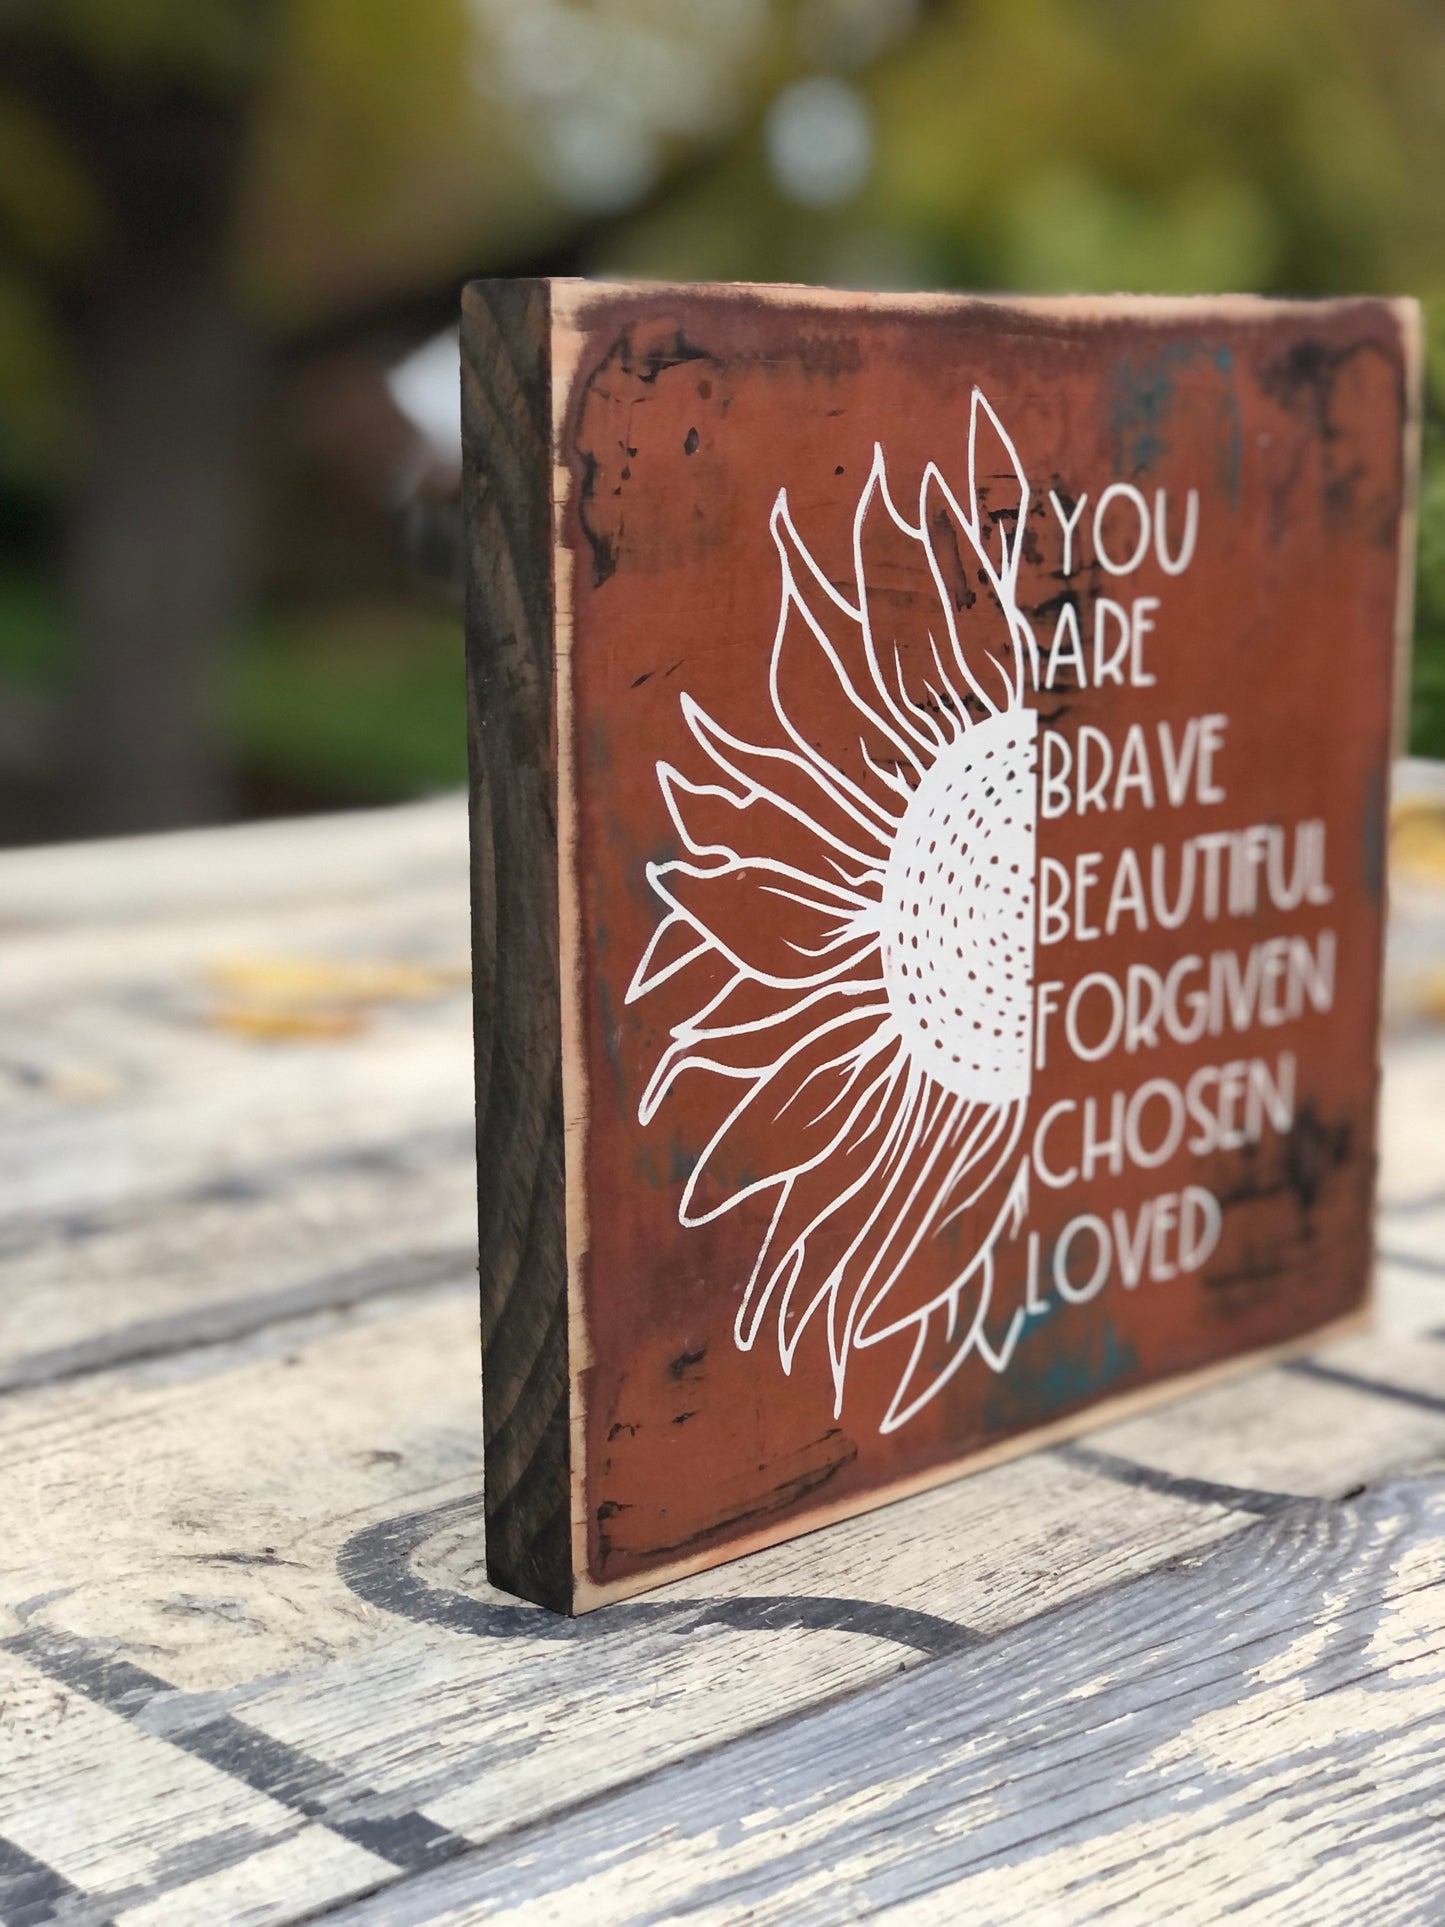 SUNFLOWER YOU ARE BRAVE, BEAUTIFUL, FORGIVEN, CHOSEN, LOVED WOOD SIGN